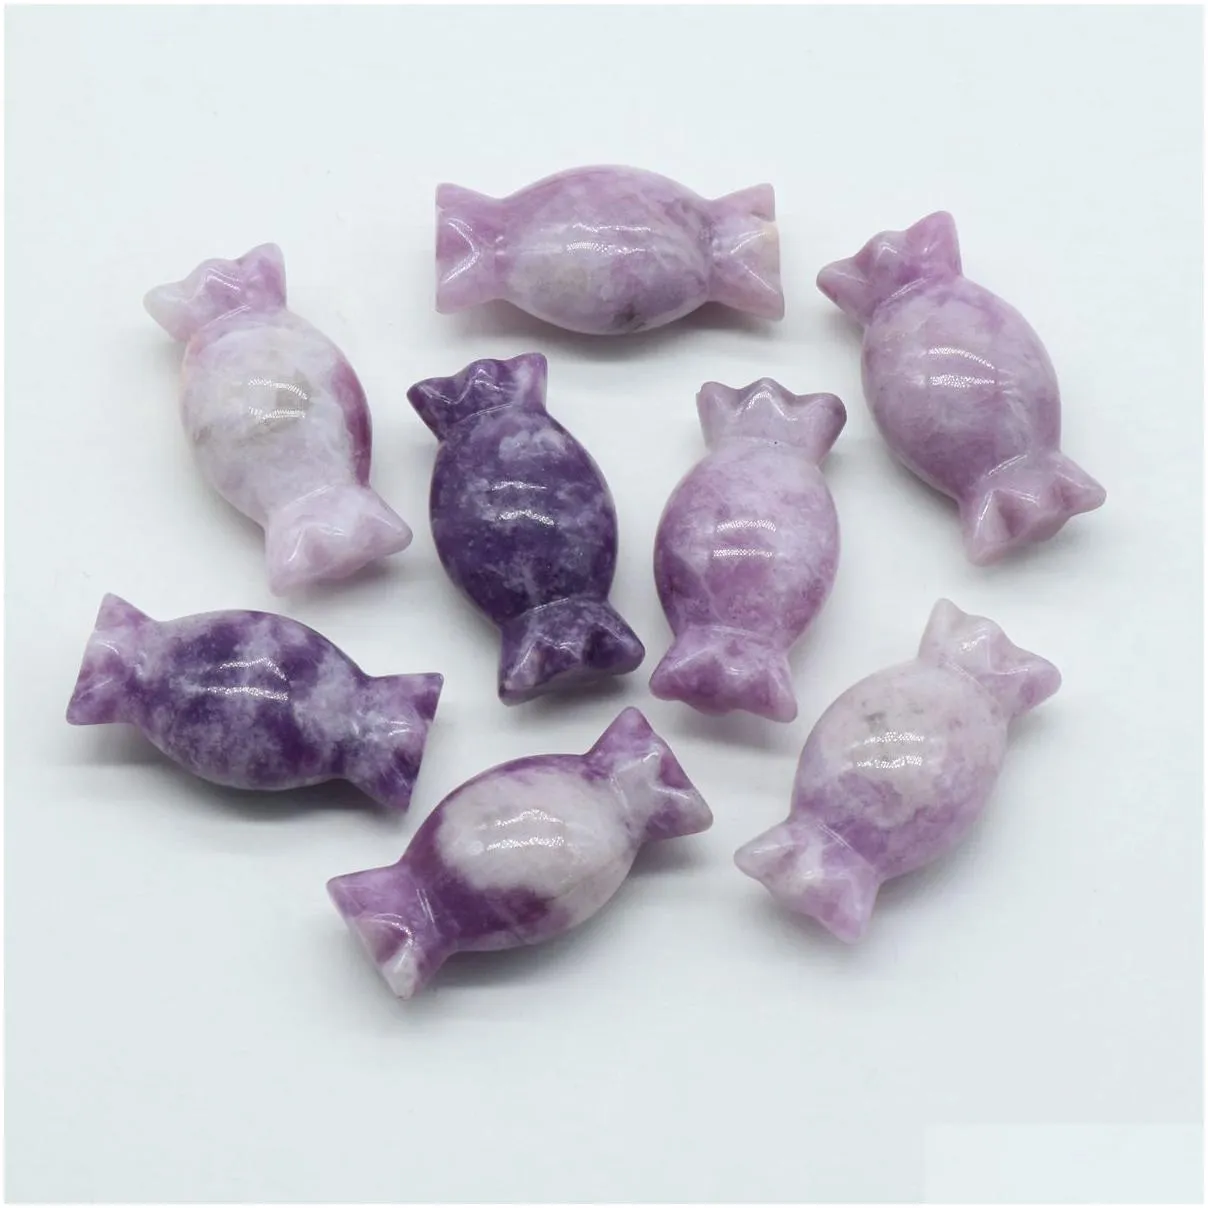 Natural Stone Carving Festival Candy Gift Gemstone Agate Ornaments Folk Arts Healing Energy For Decorate